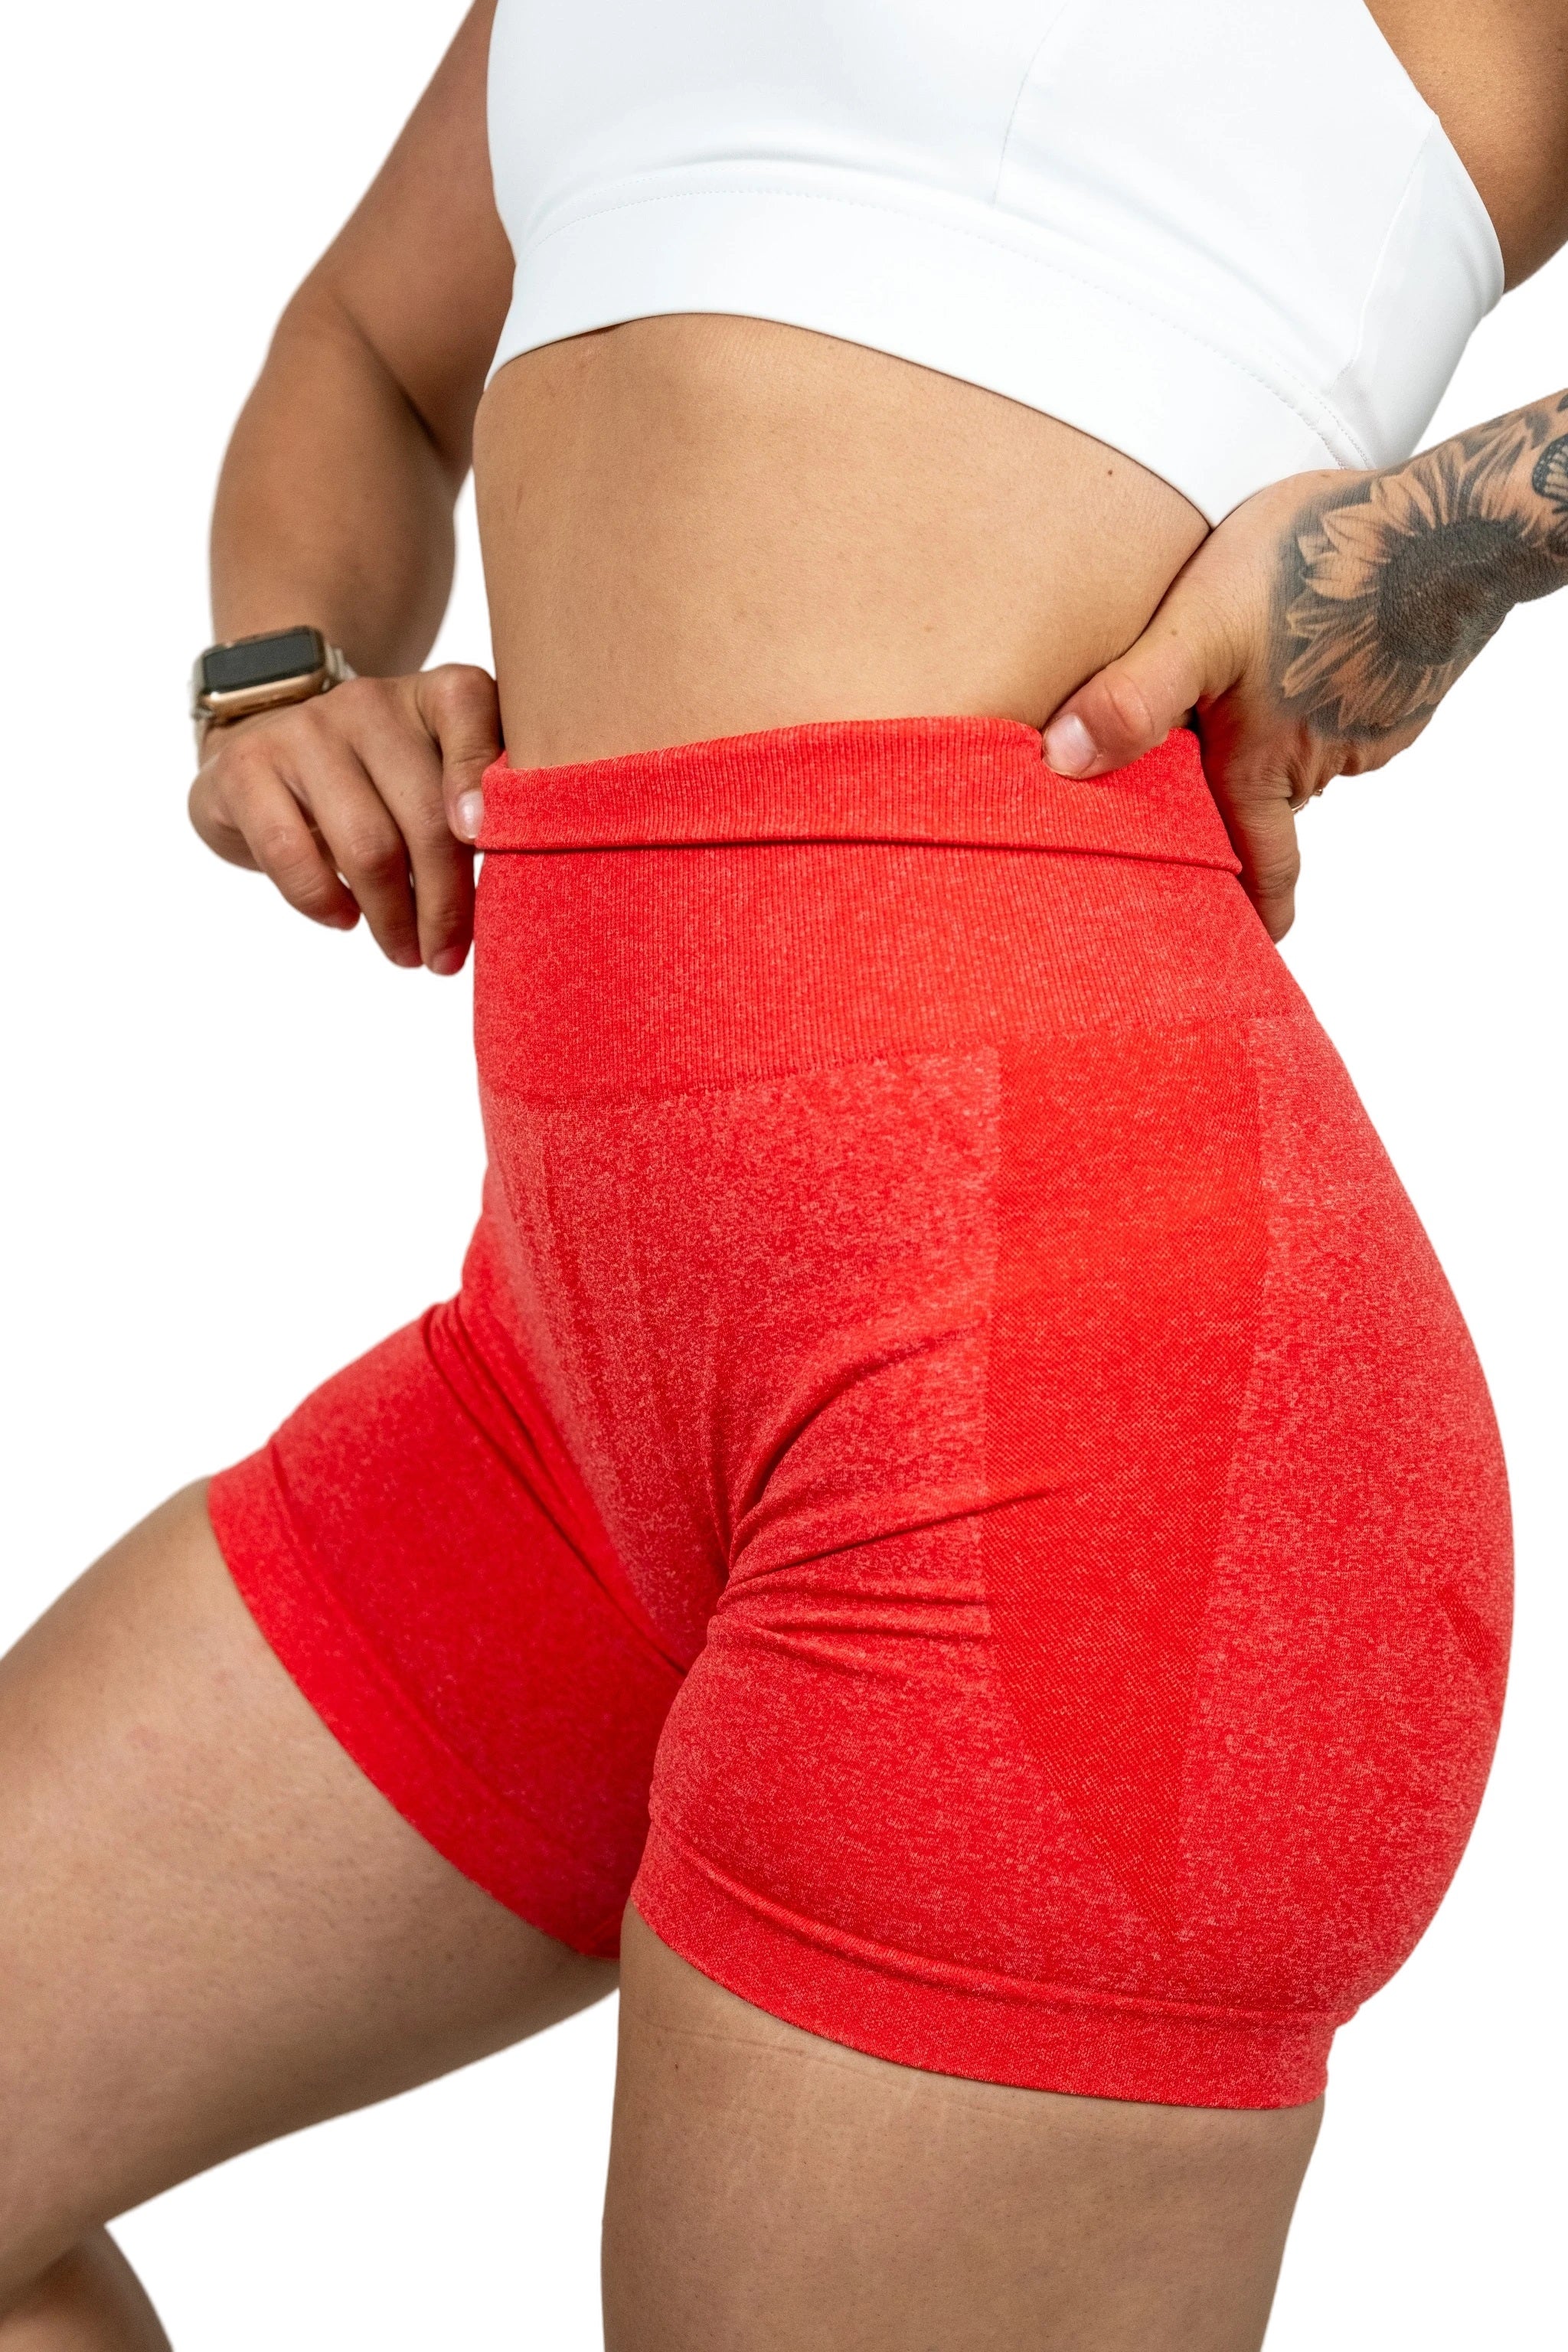 Candy Apple Shorts Contour Confidence Seamless – Embody